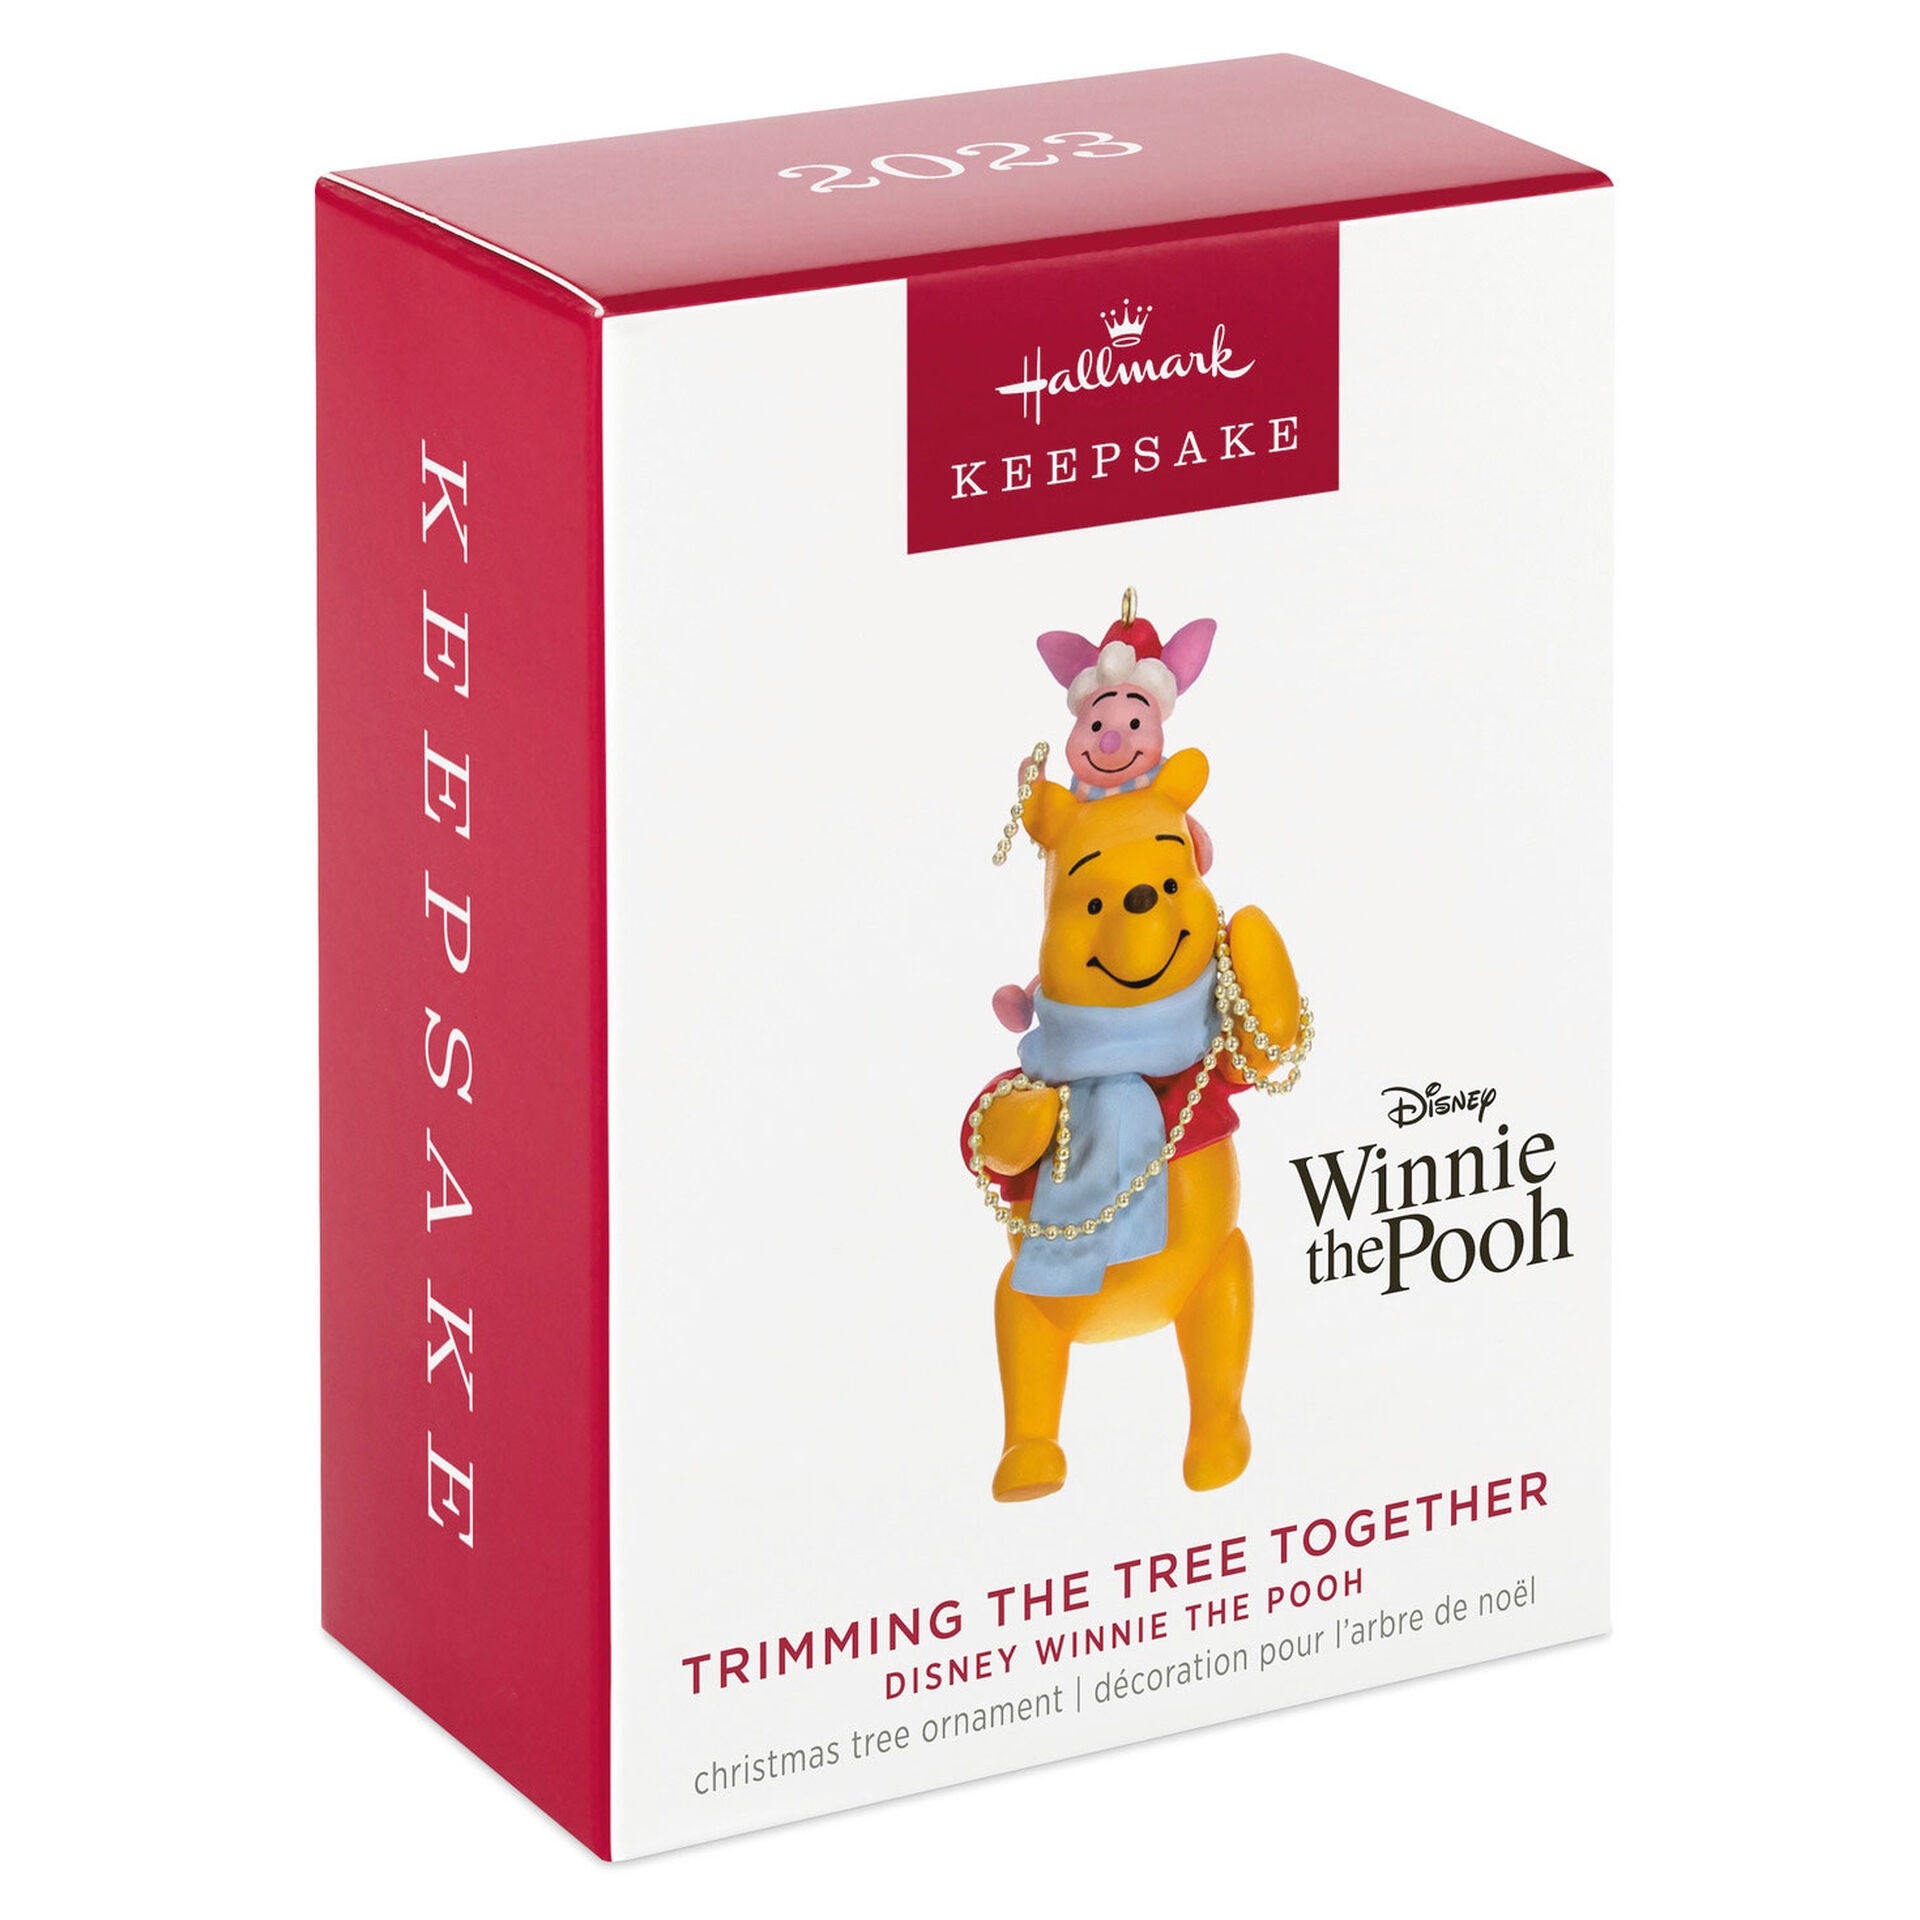 Disney Winnie the Pooh Trimming the Tree Together Ornament